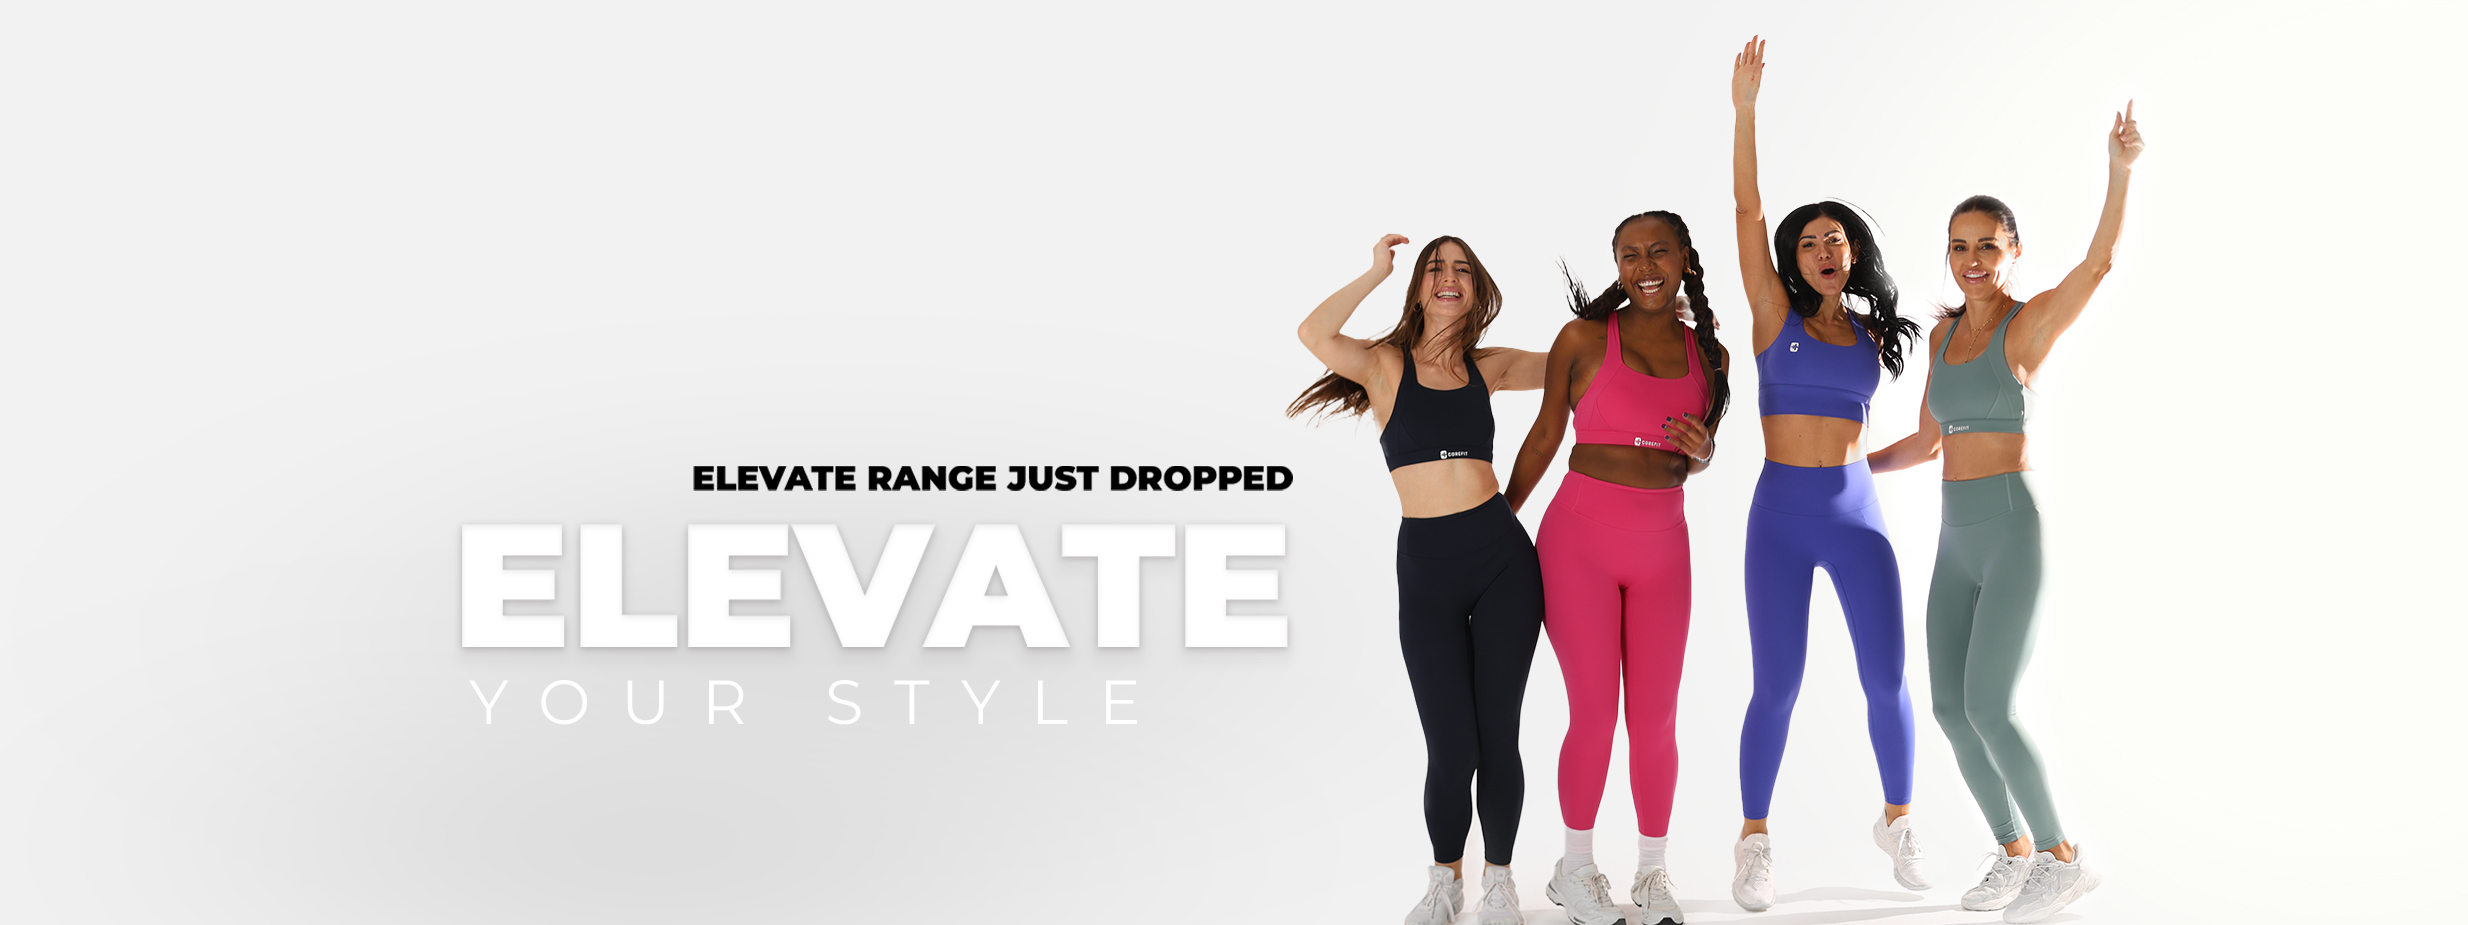 ELEVATE-Your-Style-2